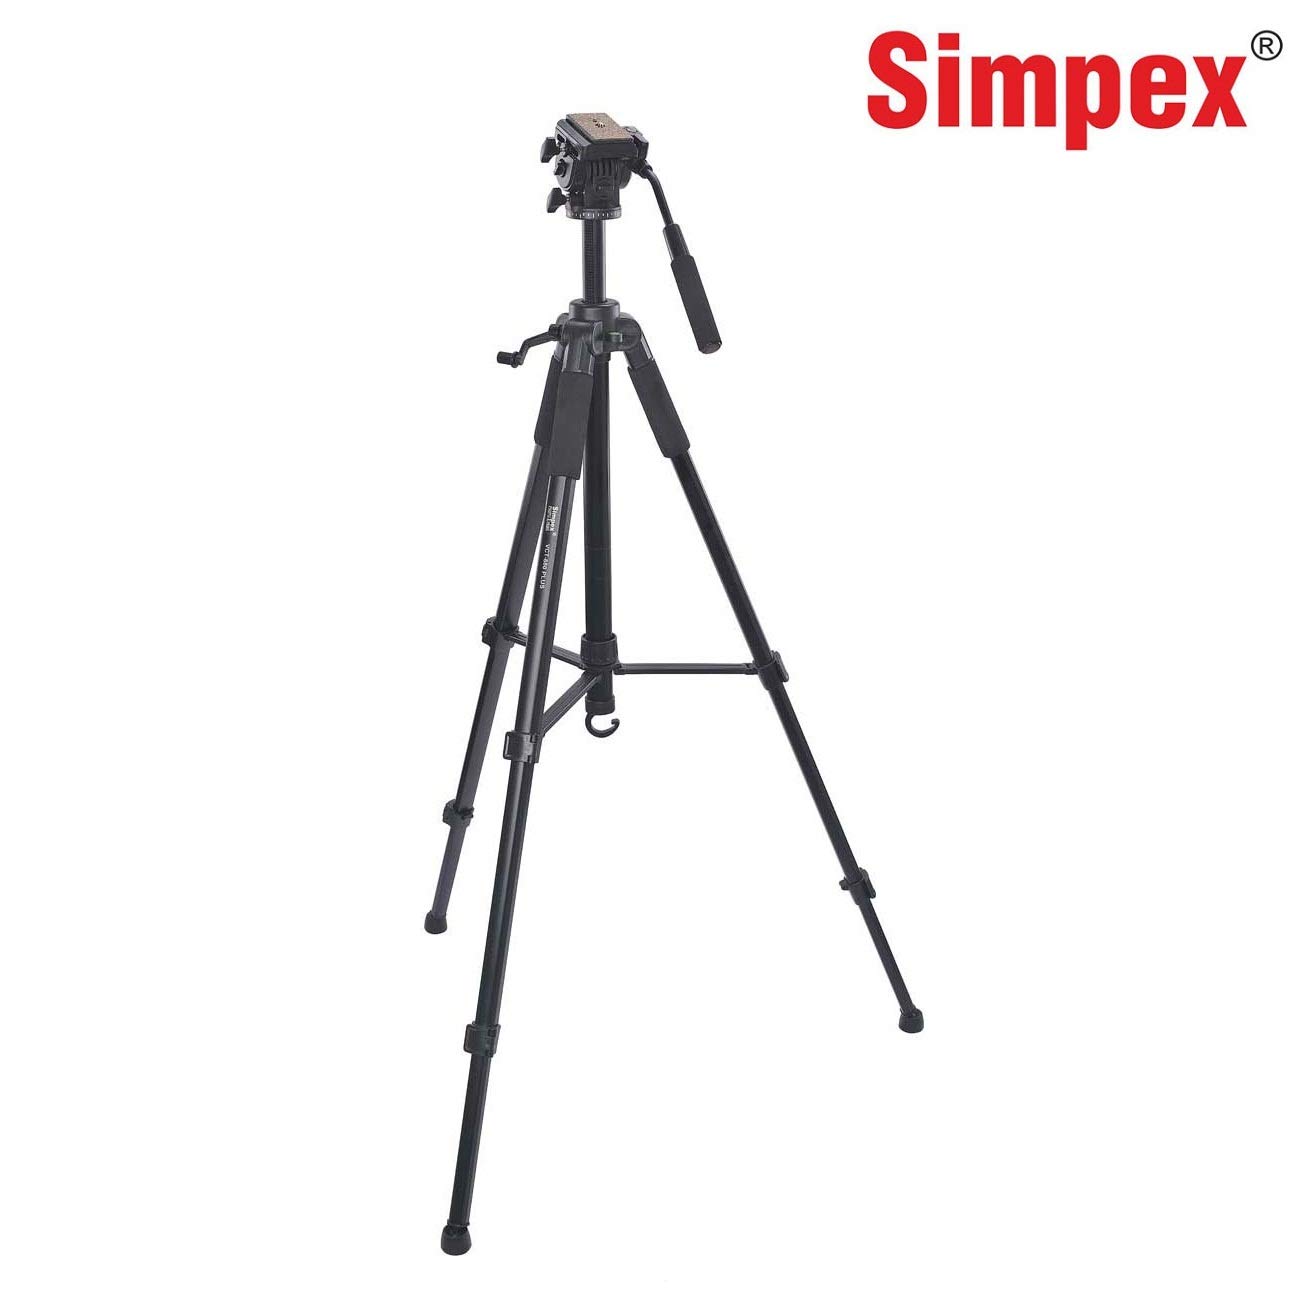 Simpex Tripod VCT 880 Plus with Bag for DSLR Camera